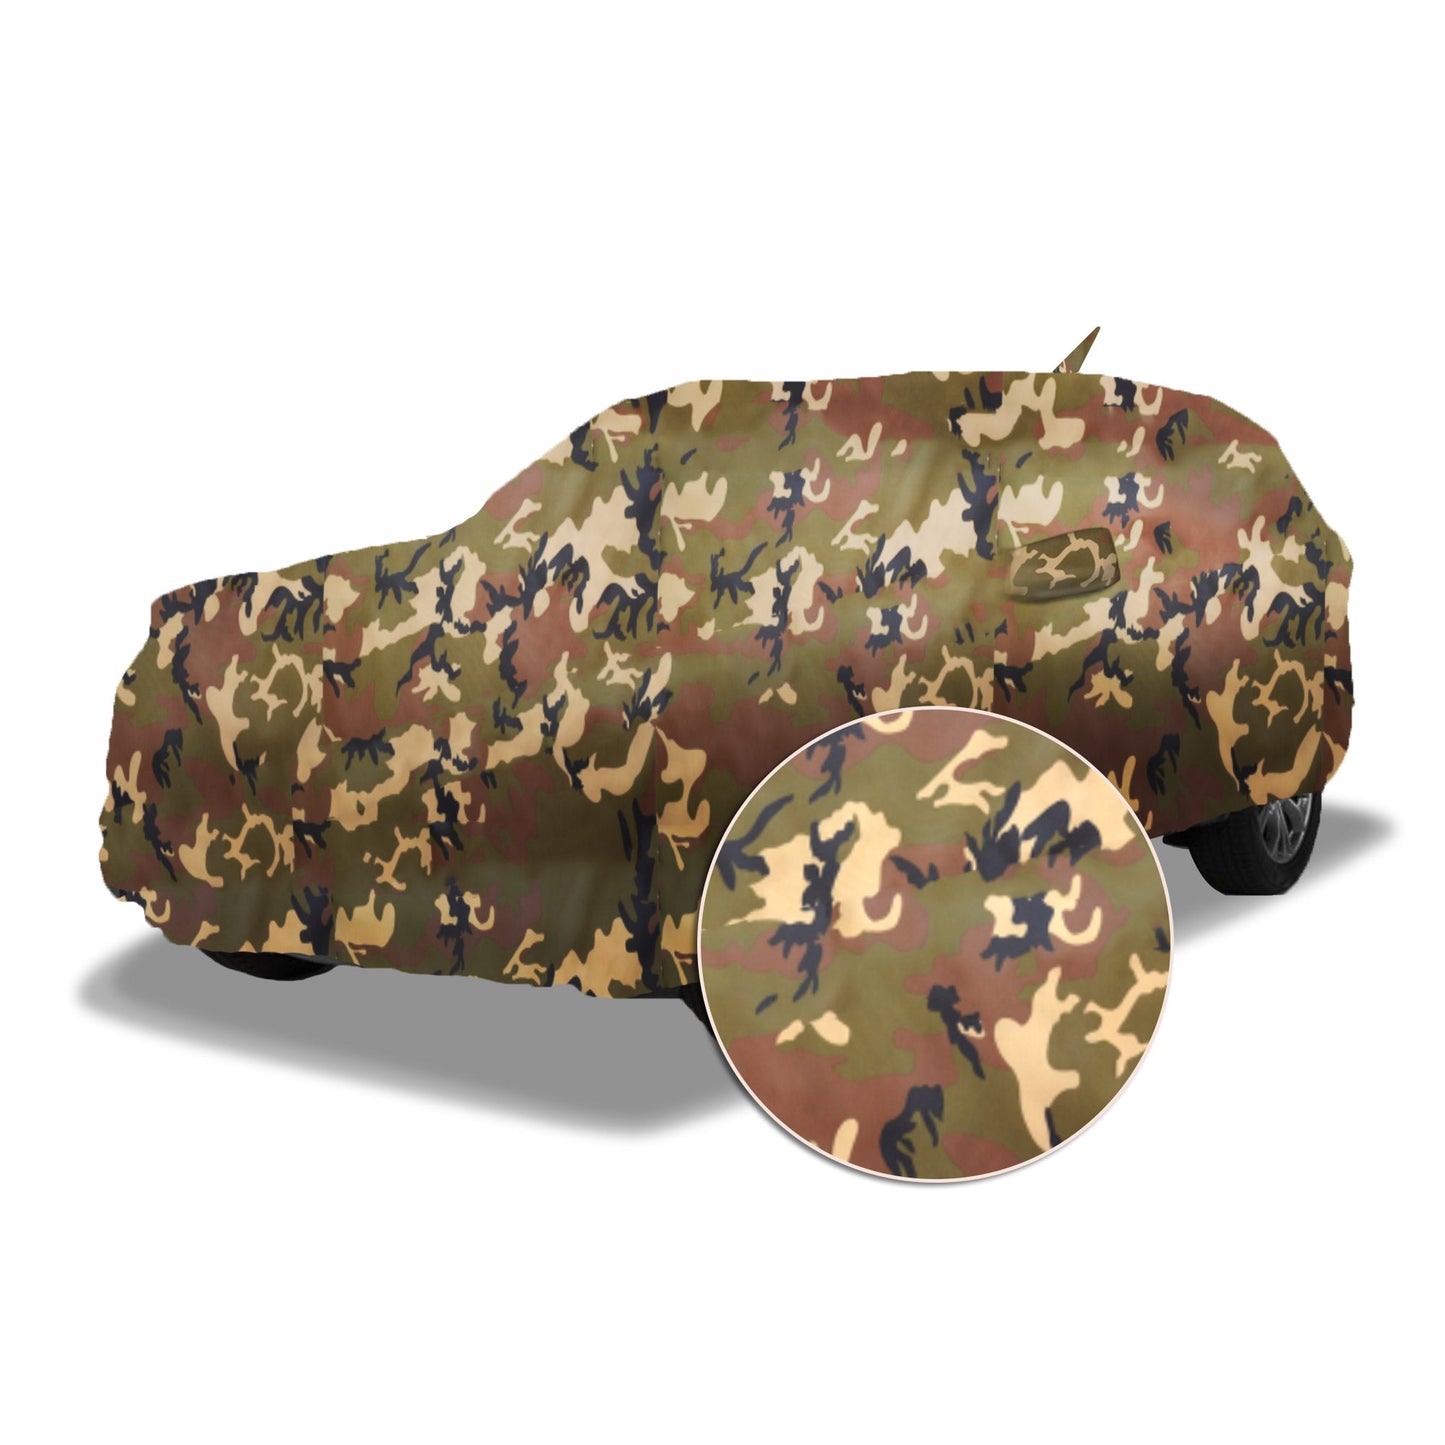 Ascot Hyundai Elite i20 Car Body Cover 2014-2020 Model Extra Strong & Dust Proof Jungle Military Car Cover with UV Proof & Water-Resistant Coating